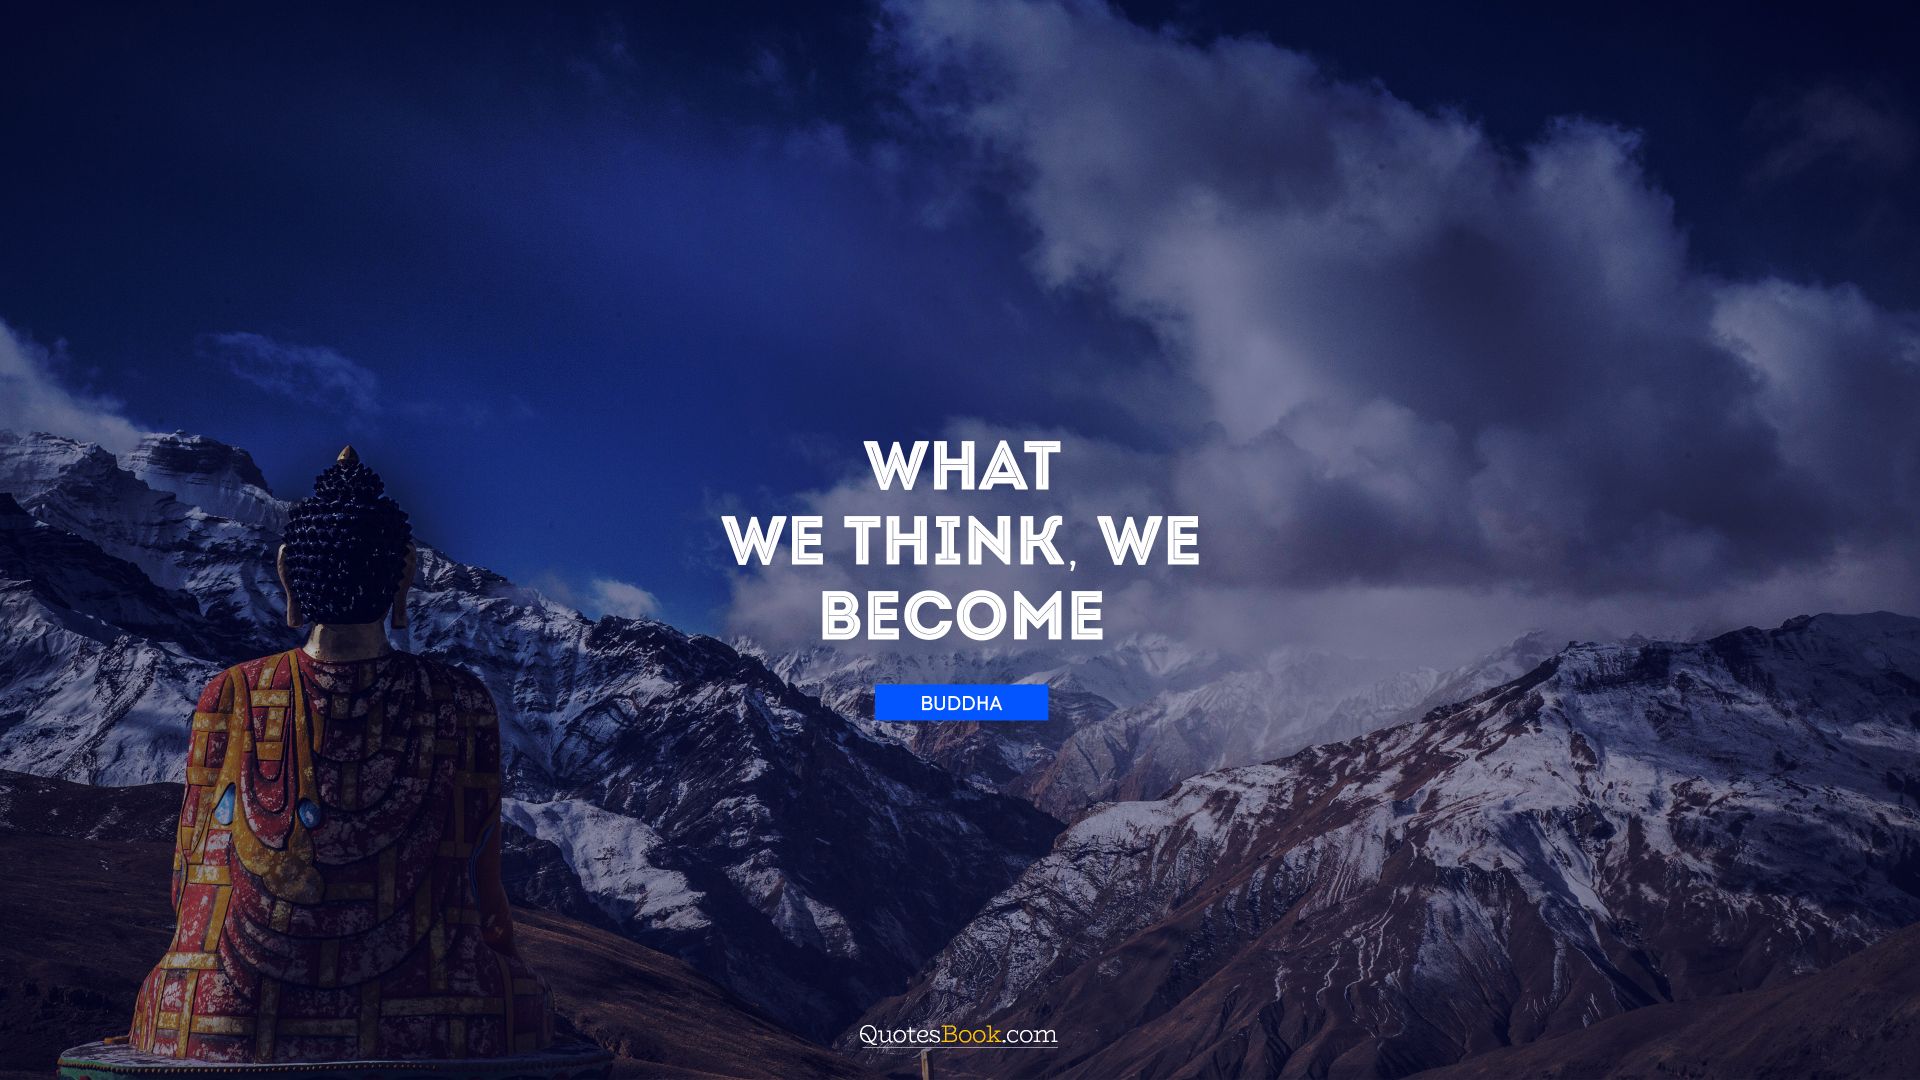 What we think, we become. - Quote by Buddha